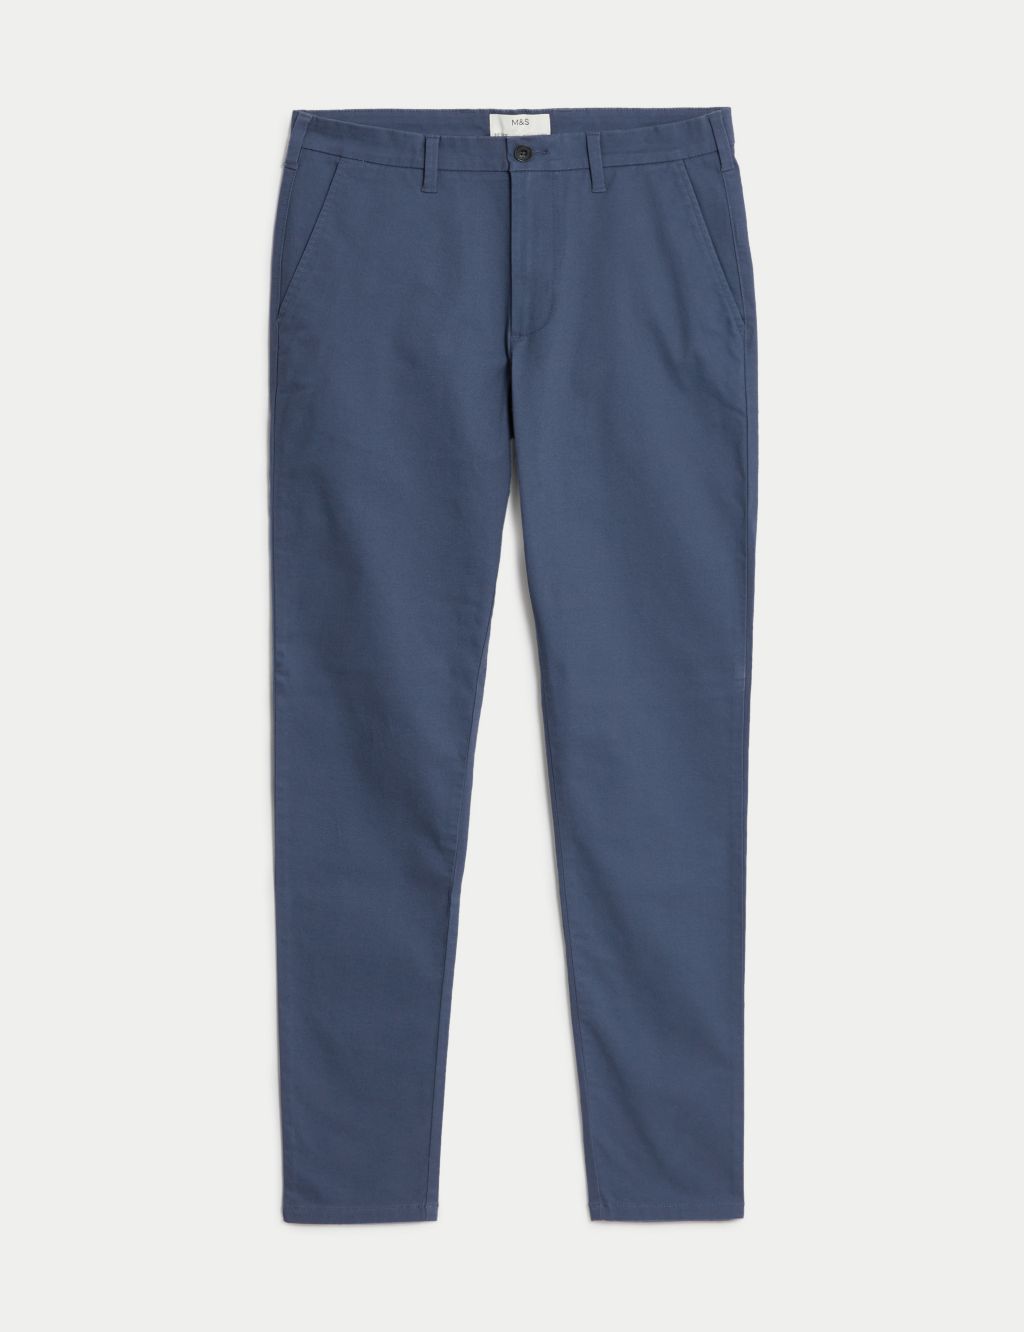 Skinny Fit Stretch Chinos image 2